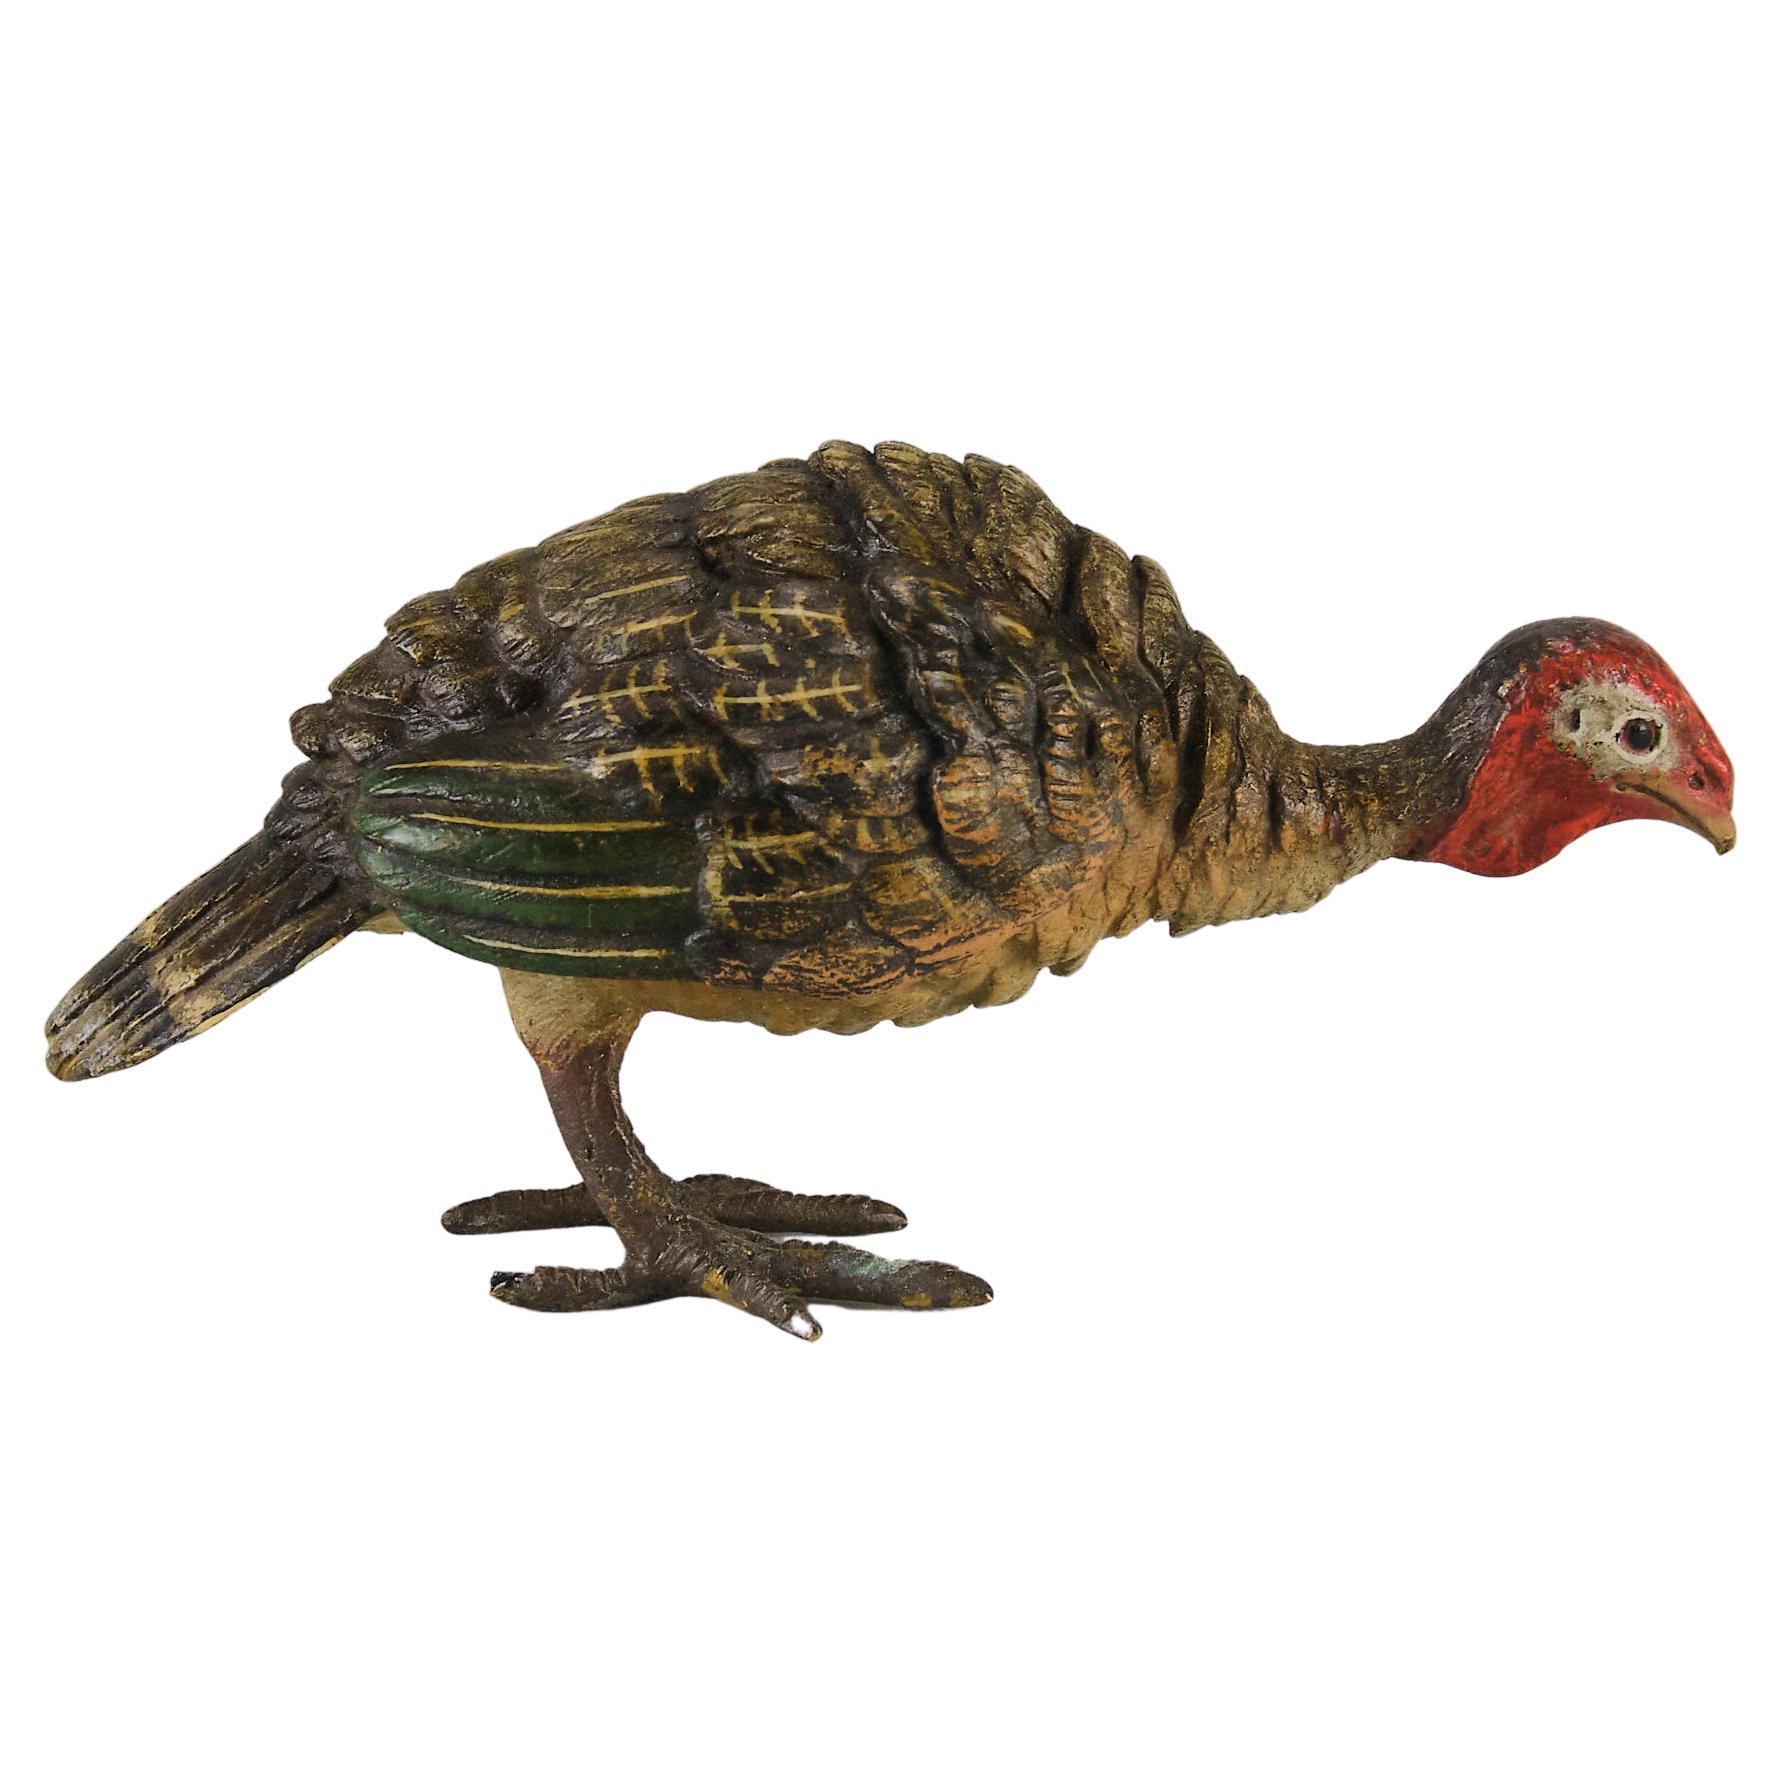 Early 20th Century Cold-Painted Bronze Entitled "Feeding Turkey" by Bergman For Sale